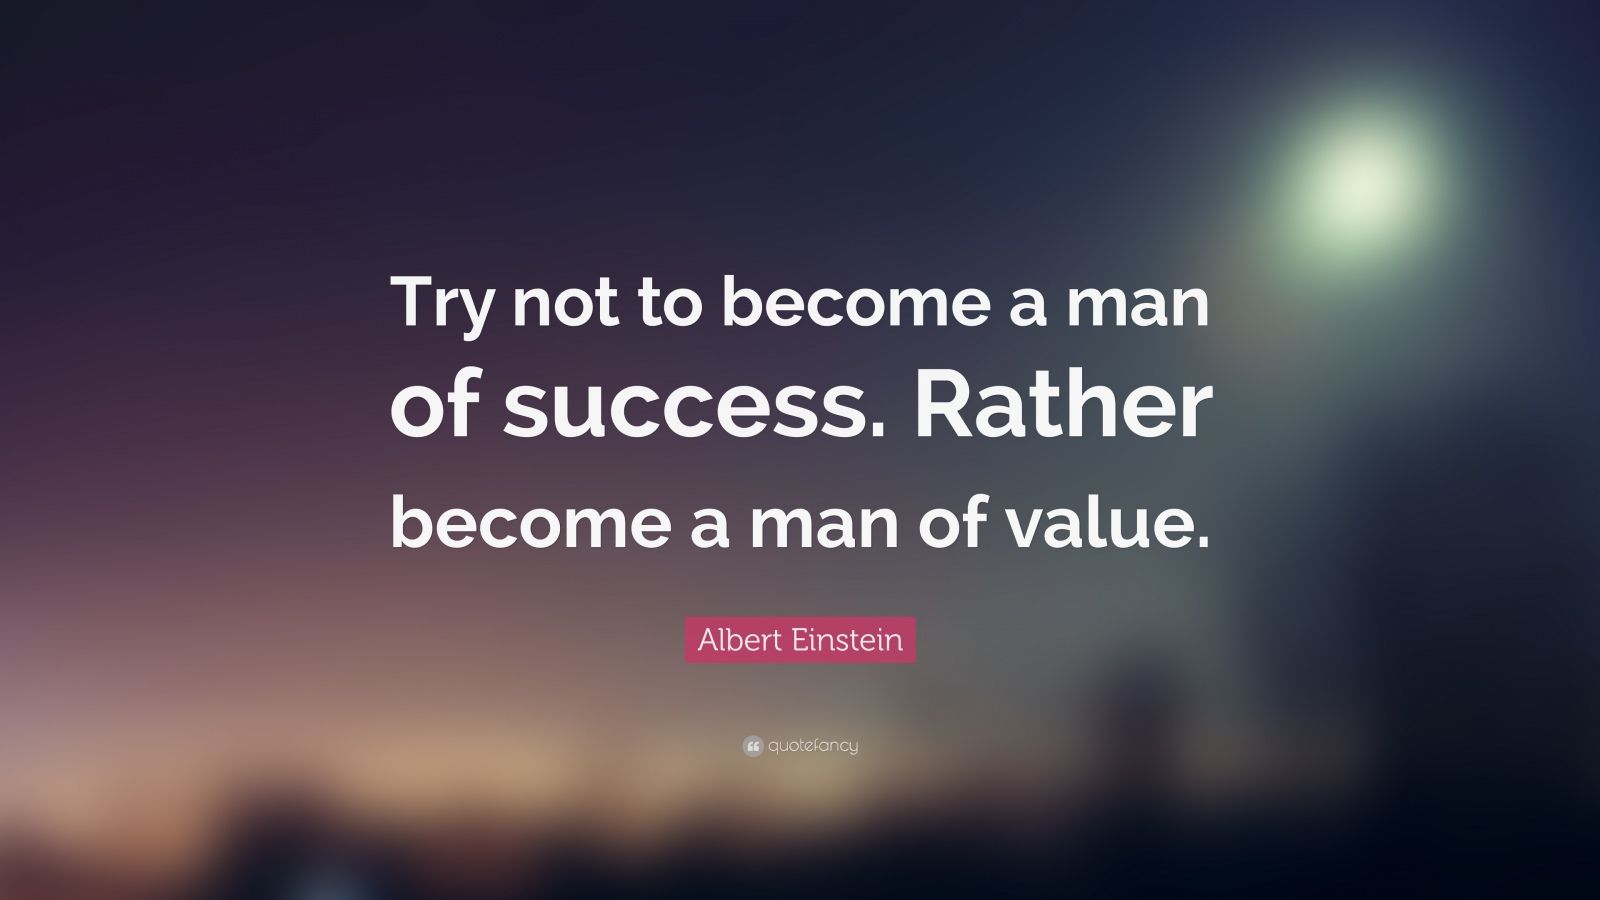 Albert Einstein Quote: “Try not to become a man of success. Rather